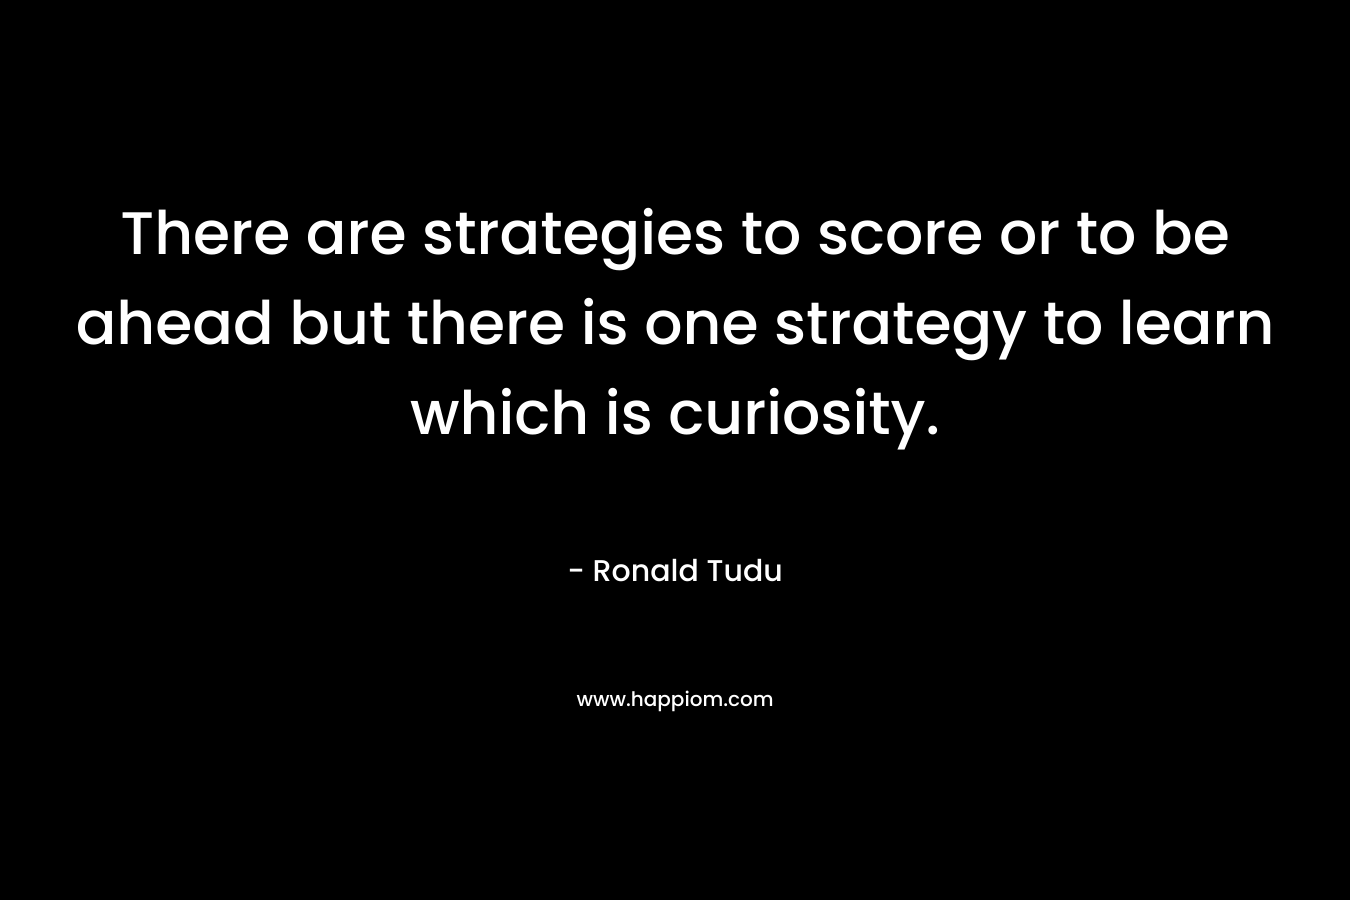 There are strategies to score or to be ahead but there is one strategy to learn which is curiosity.